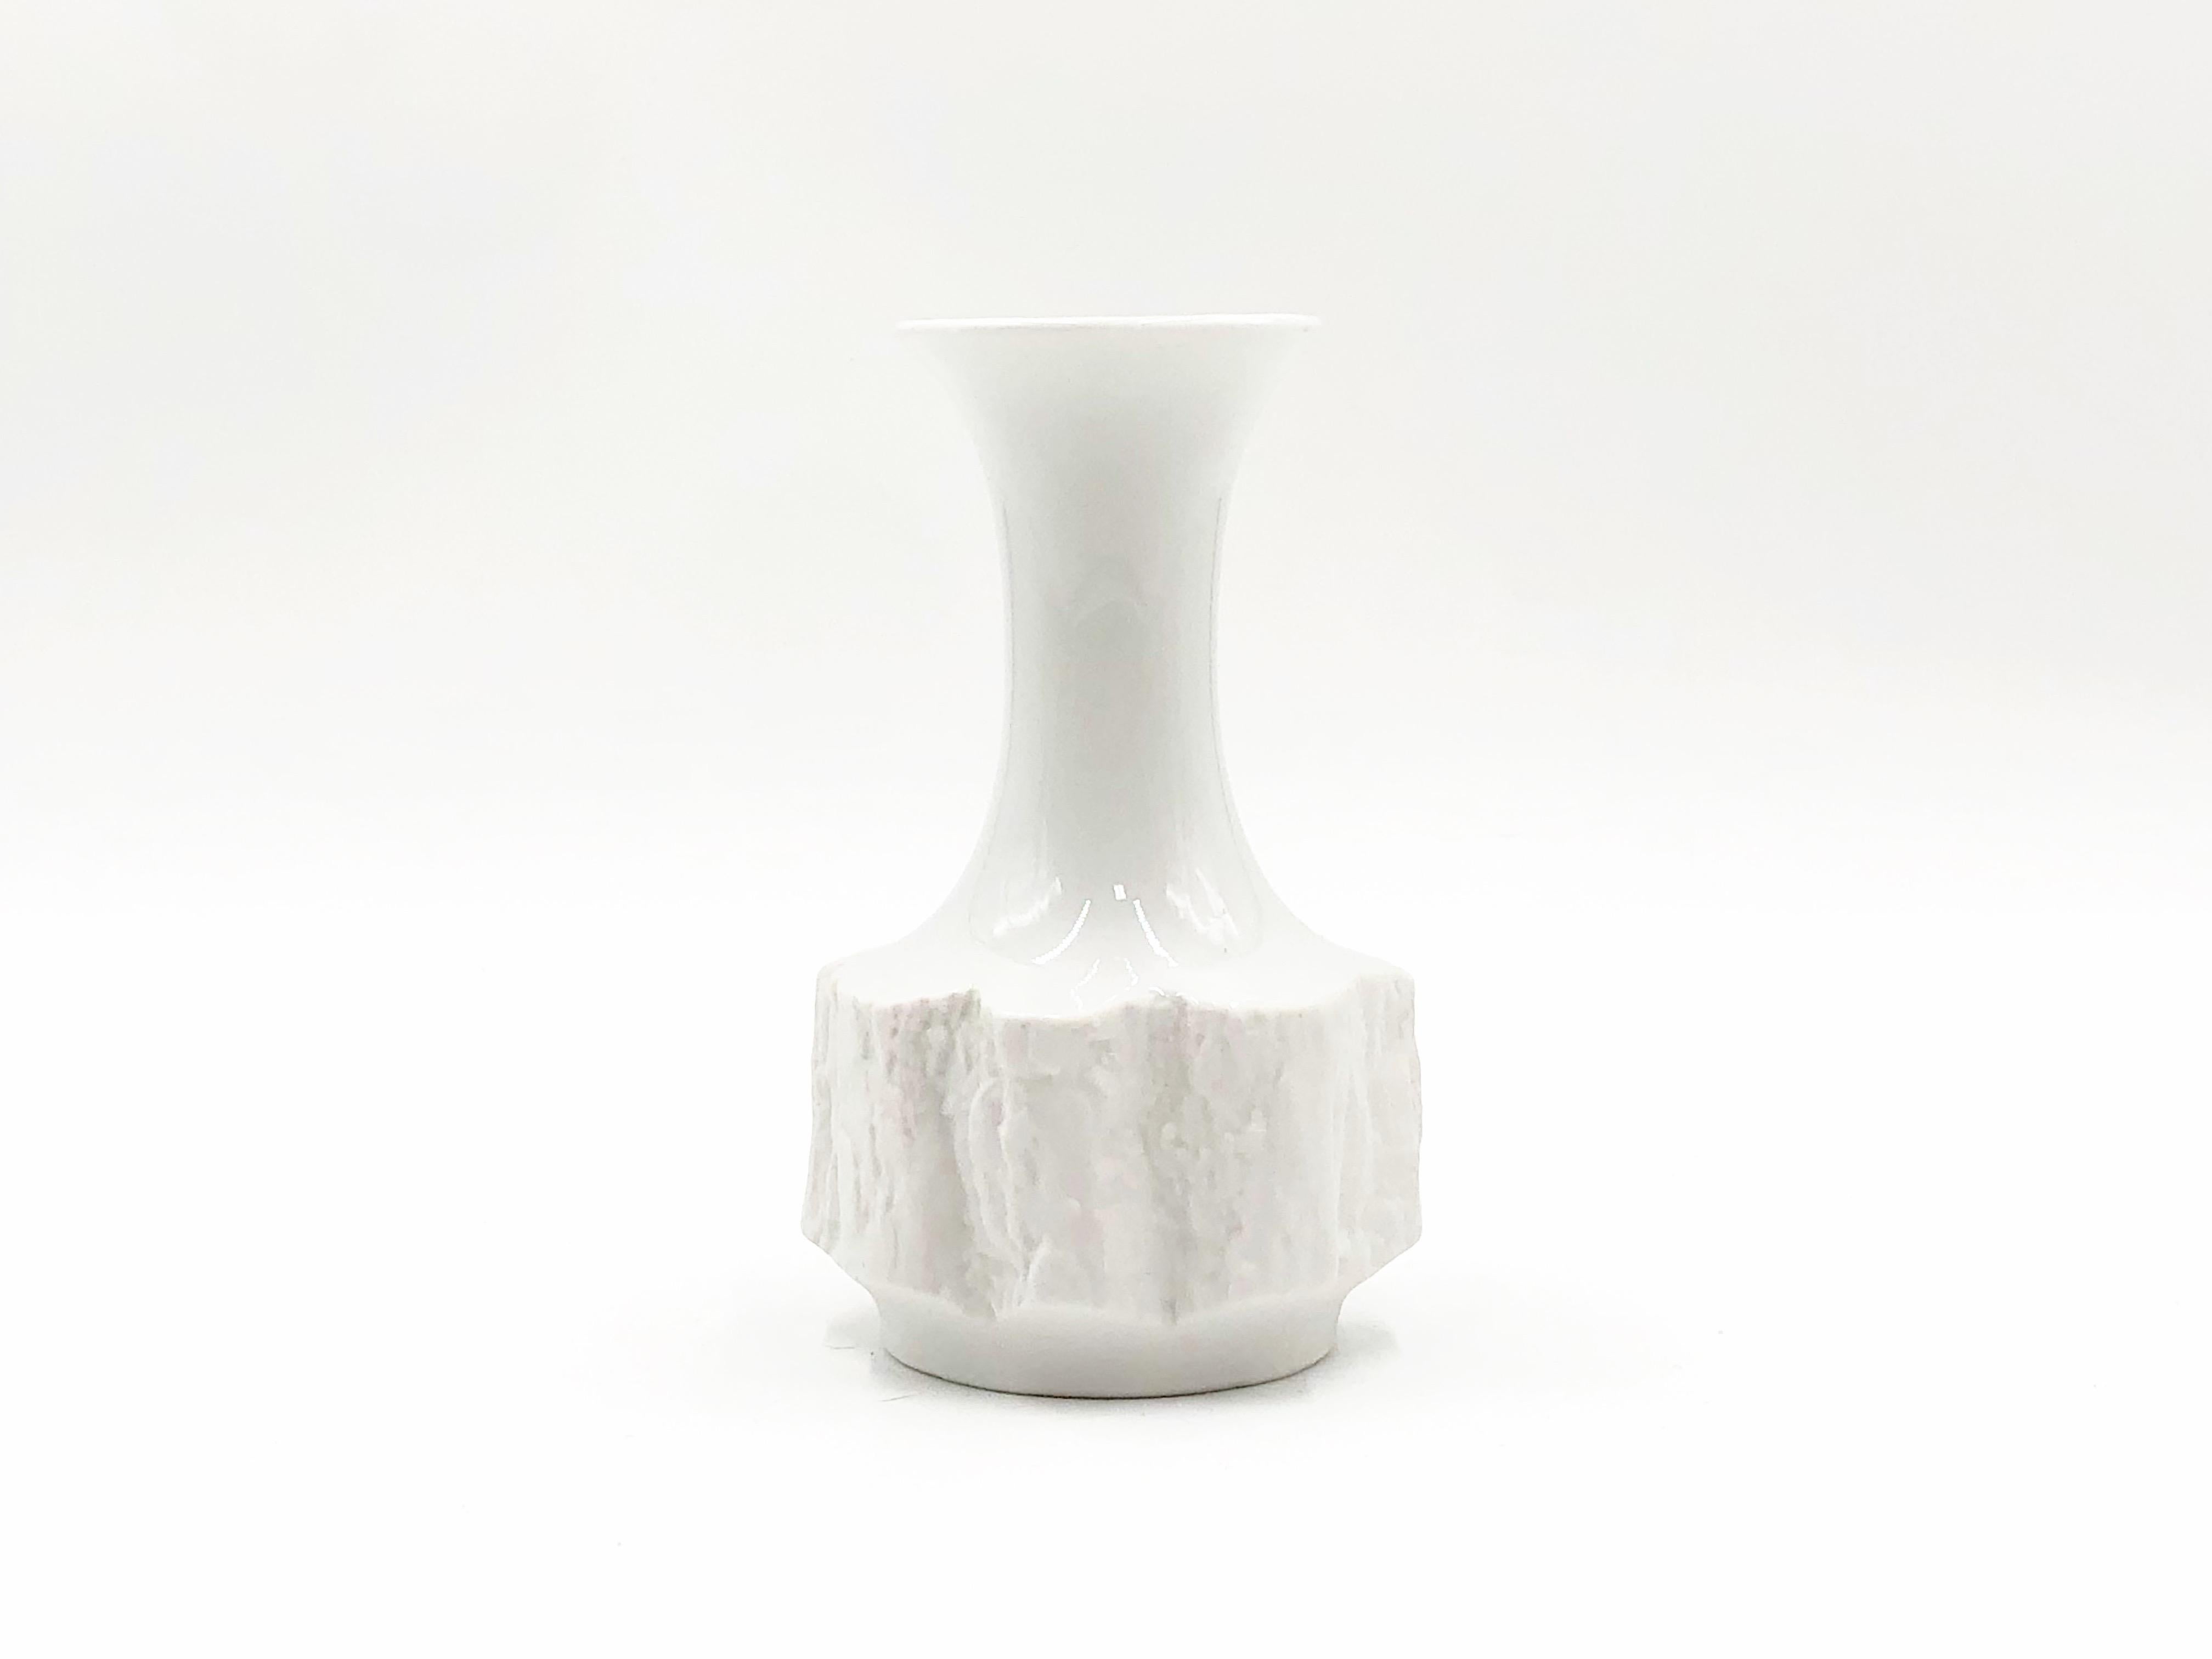 Vintage White Bisque German Fine Bone Porcelain Vase by Bareuther, circa 1970s In Good Condition For Sale In McKinney, TX